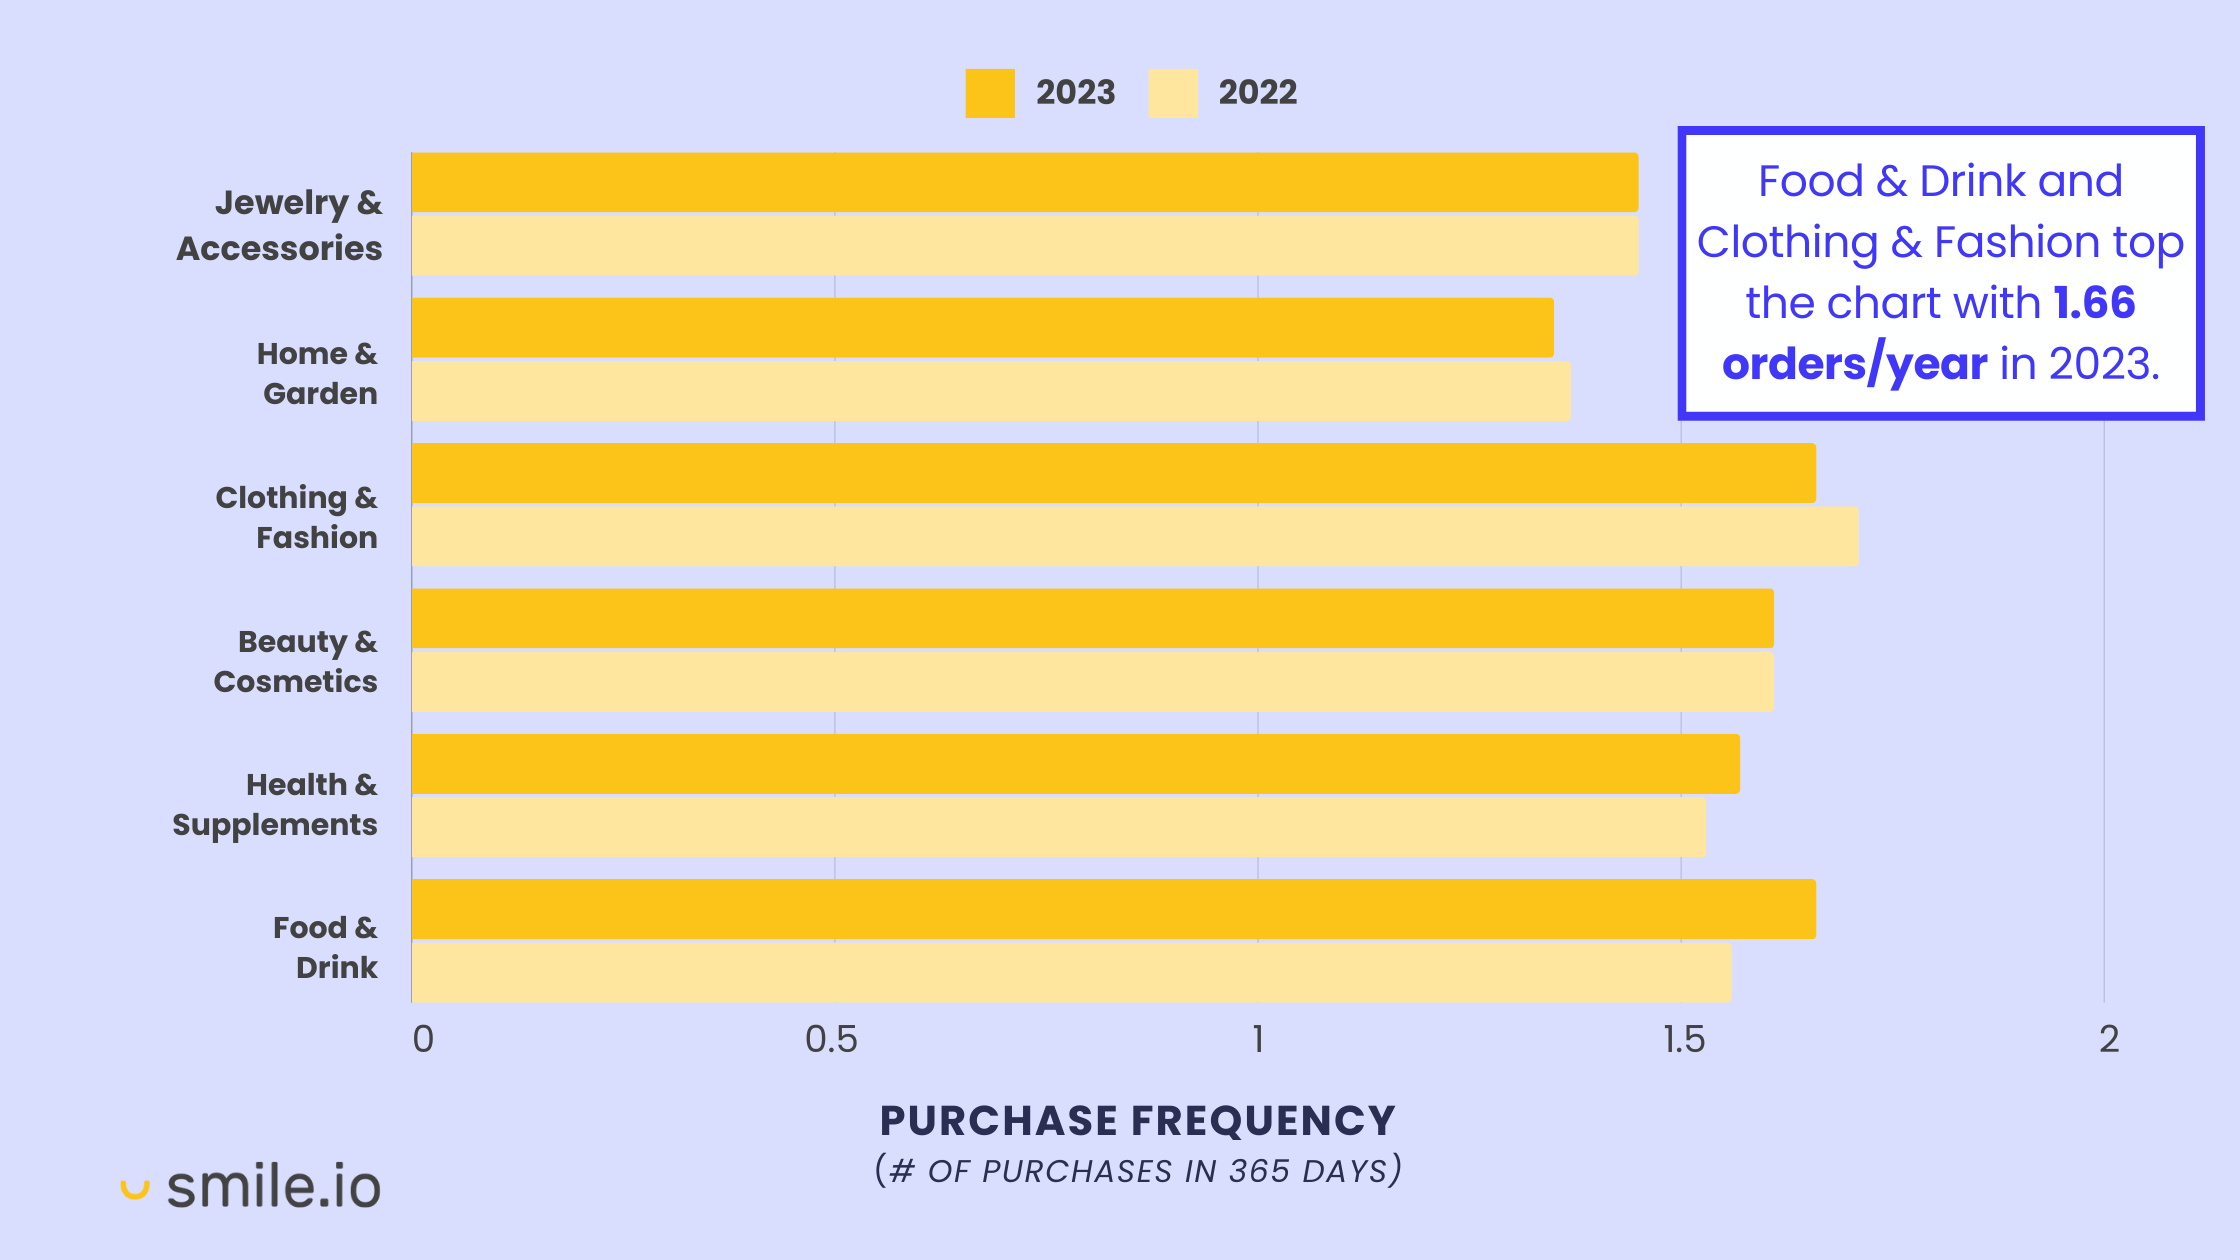 A bar graph showing the year-over-year changes in Purchase Frequency for 6 main industries (Jewelry & Accessories, Home & Garden, Clothing & Fashion, Beauty & Cosmetics, Health & Supplements, and Food & Drink). A call-out says Food and Drink and Clothing and Fashion top the chart with 1.66 orders per year in 2023. 